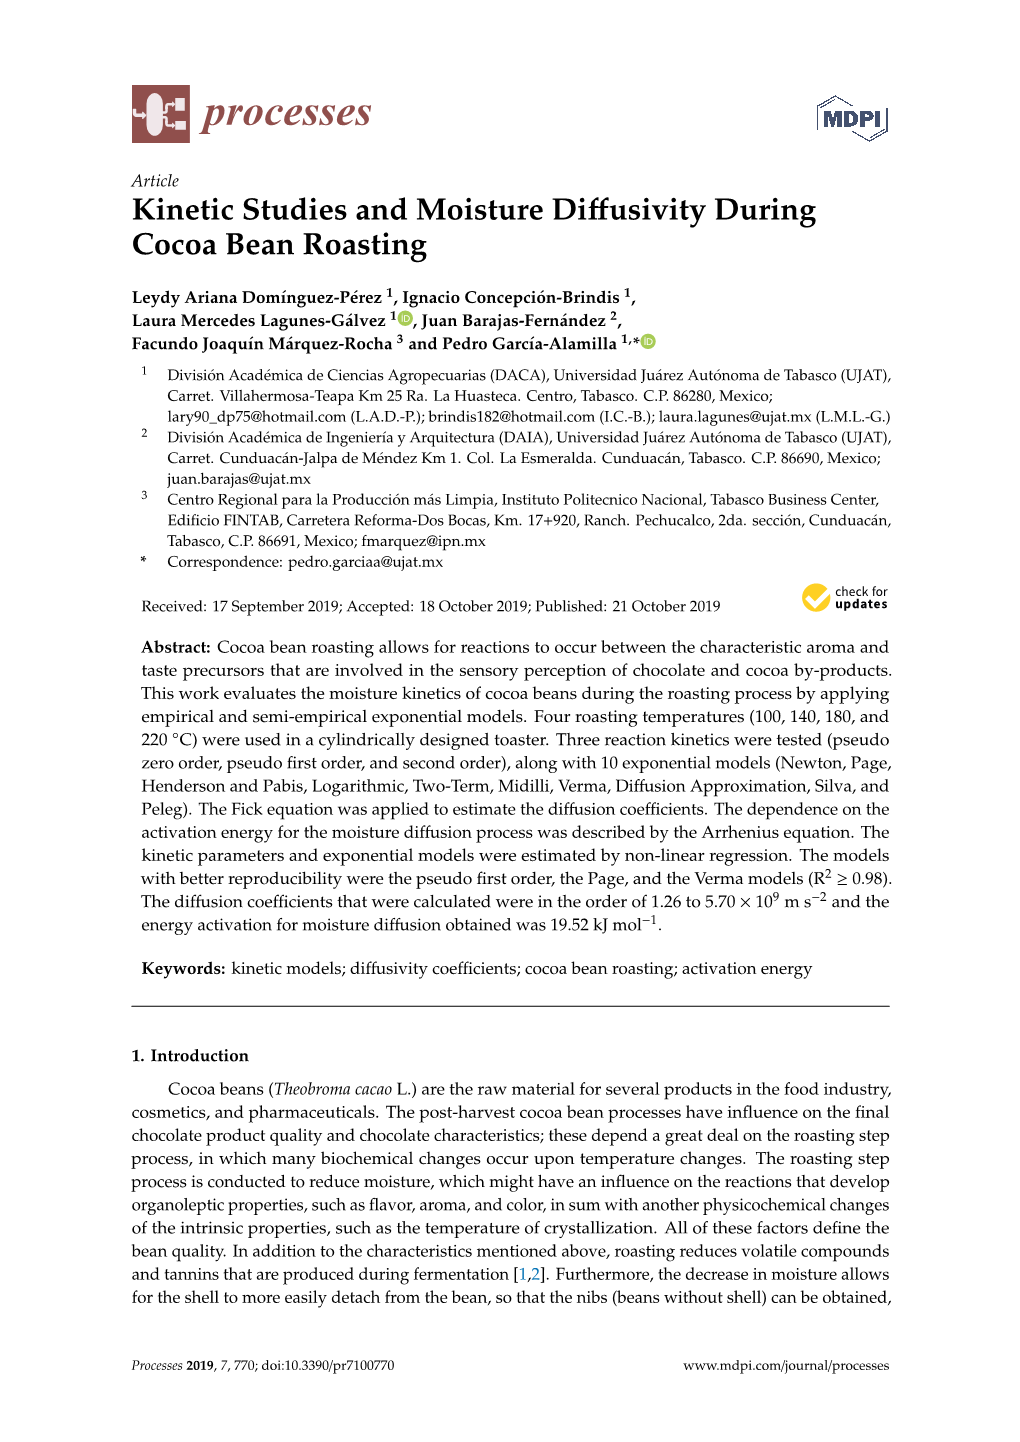 Kinetic Studies and Moisture Diffusivity During Cocoa Bean Roasting